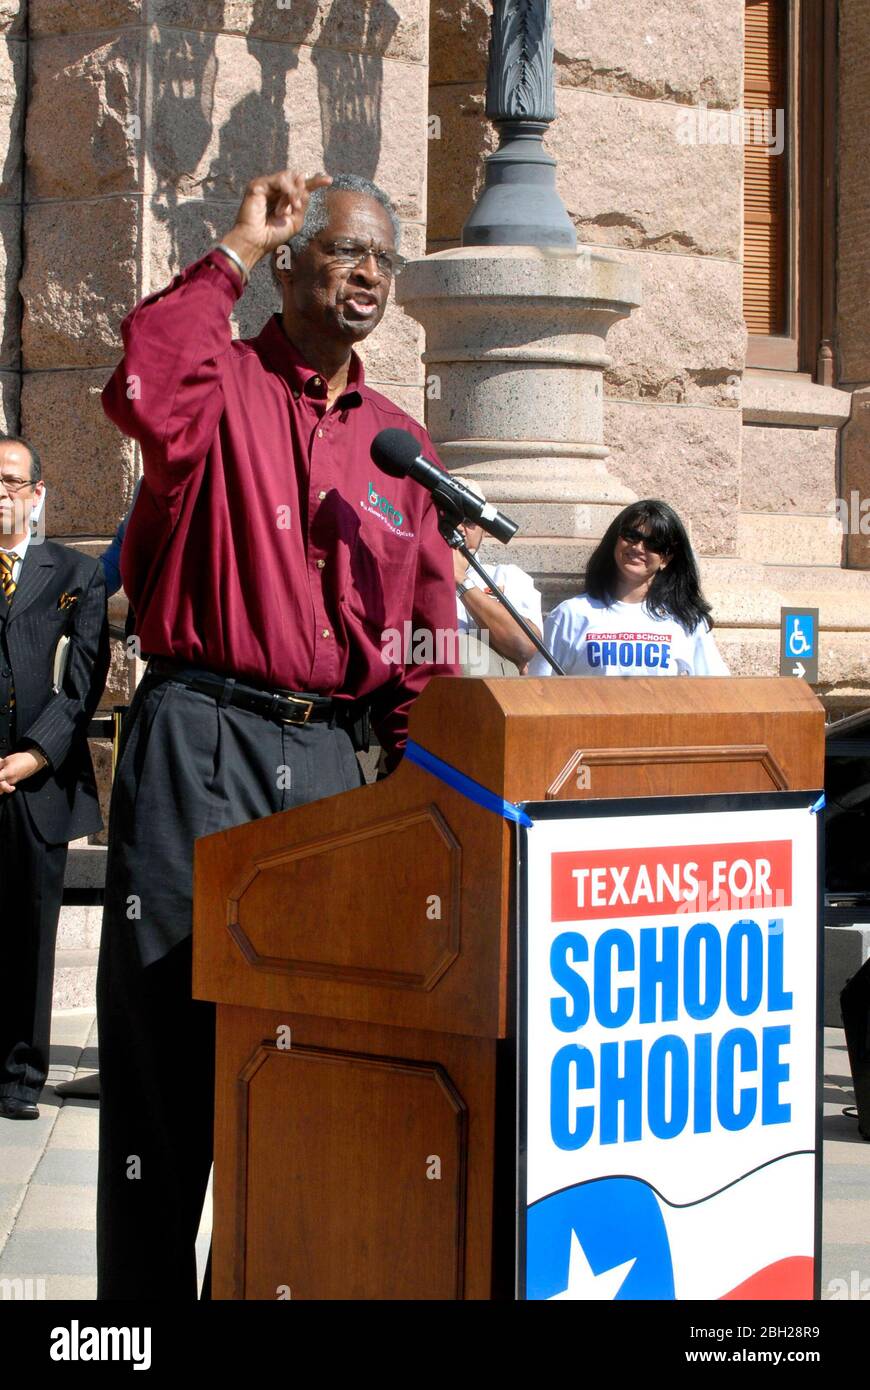 Austin, Texas USA, February 7, 2007:  Speaker addresses crowd at rally at Texas State Capitol of supporters of plan calling for state tax money to be spent on tuition at certain private schools. ©Marjorie Kamys Cotera / Daemmrich Photography Stock Photo